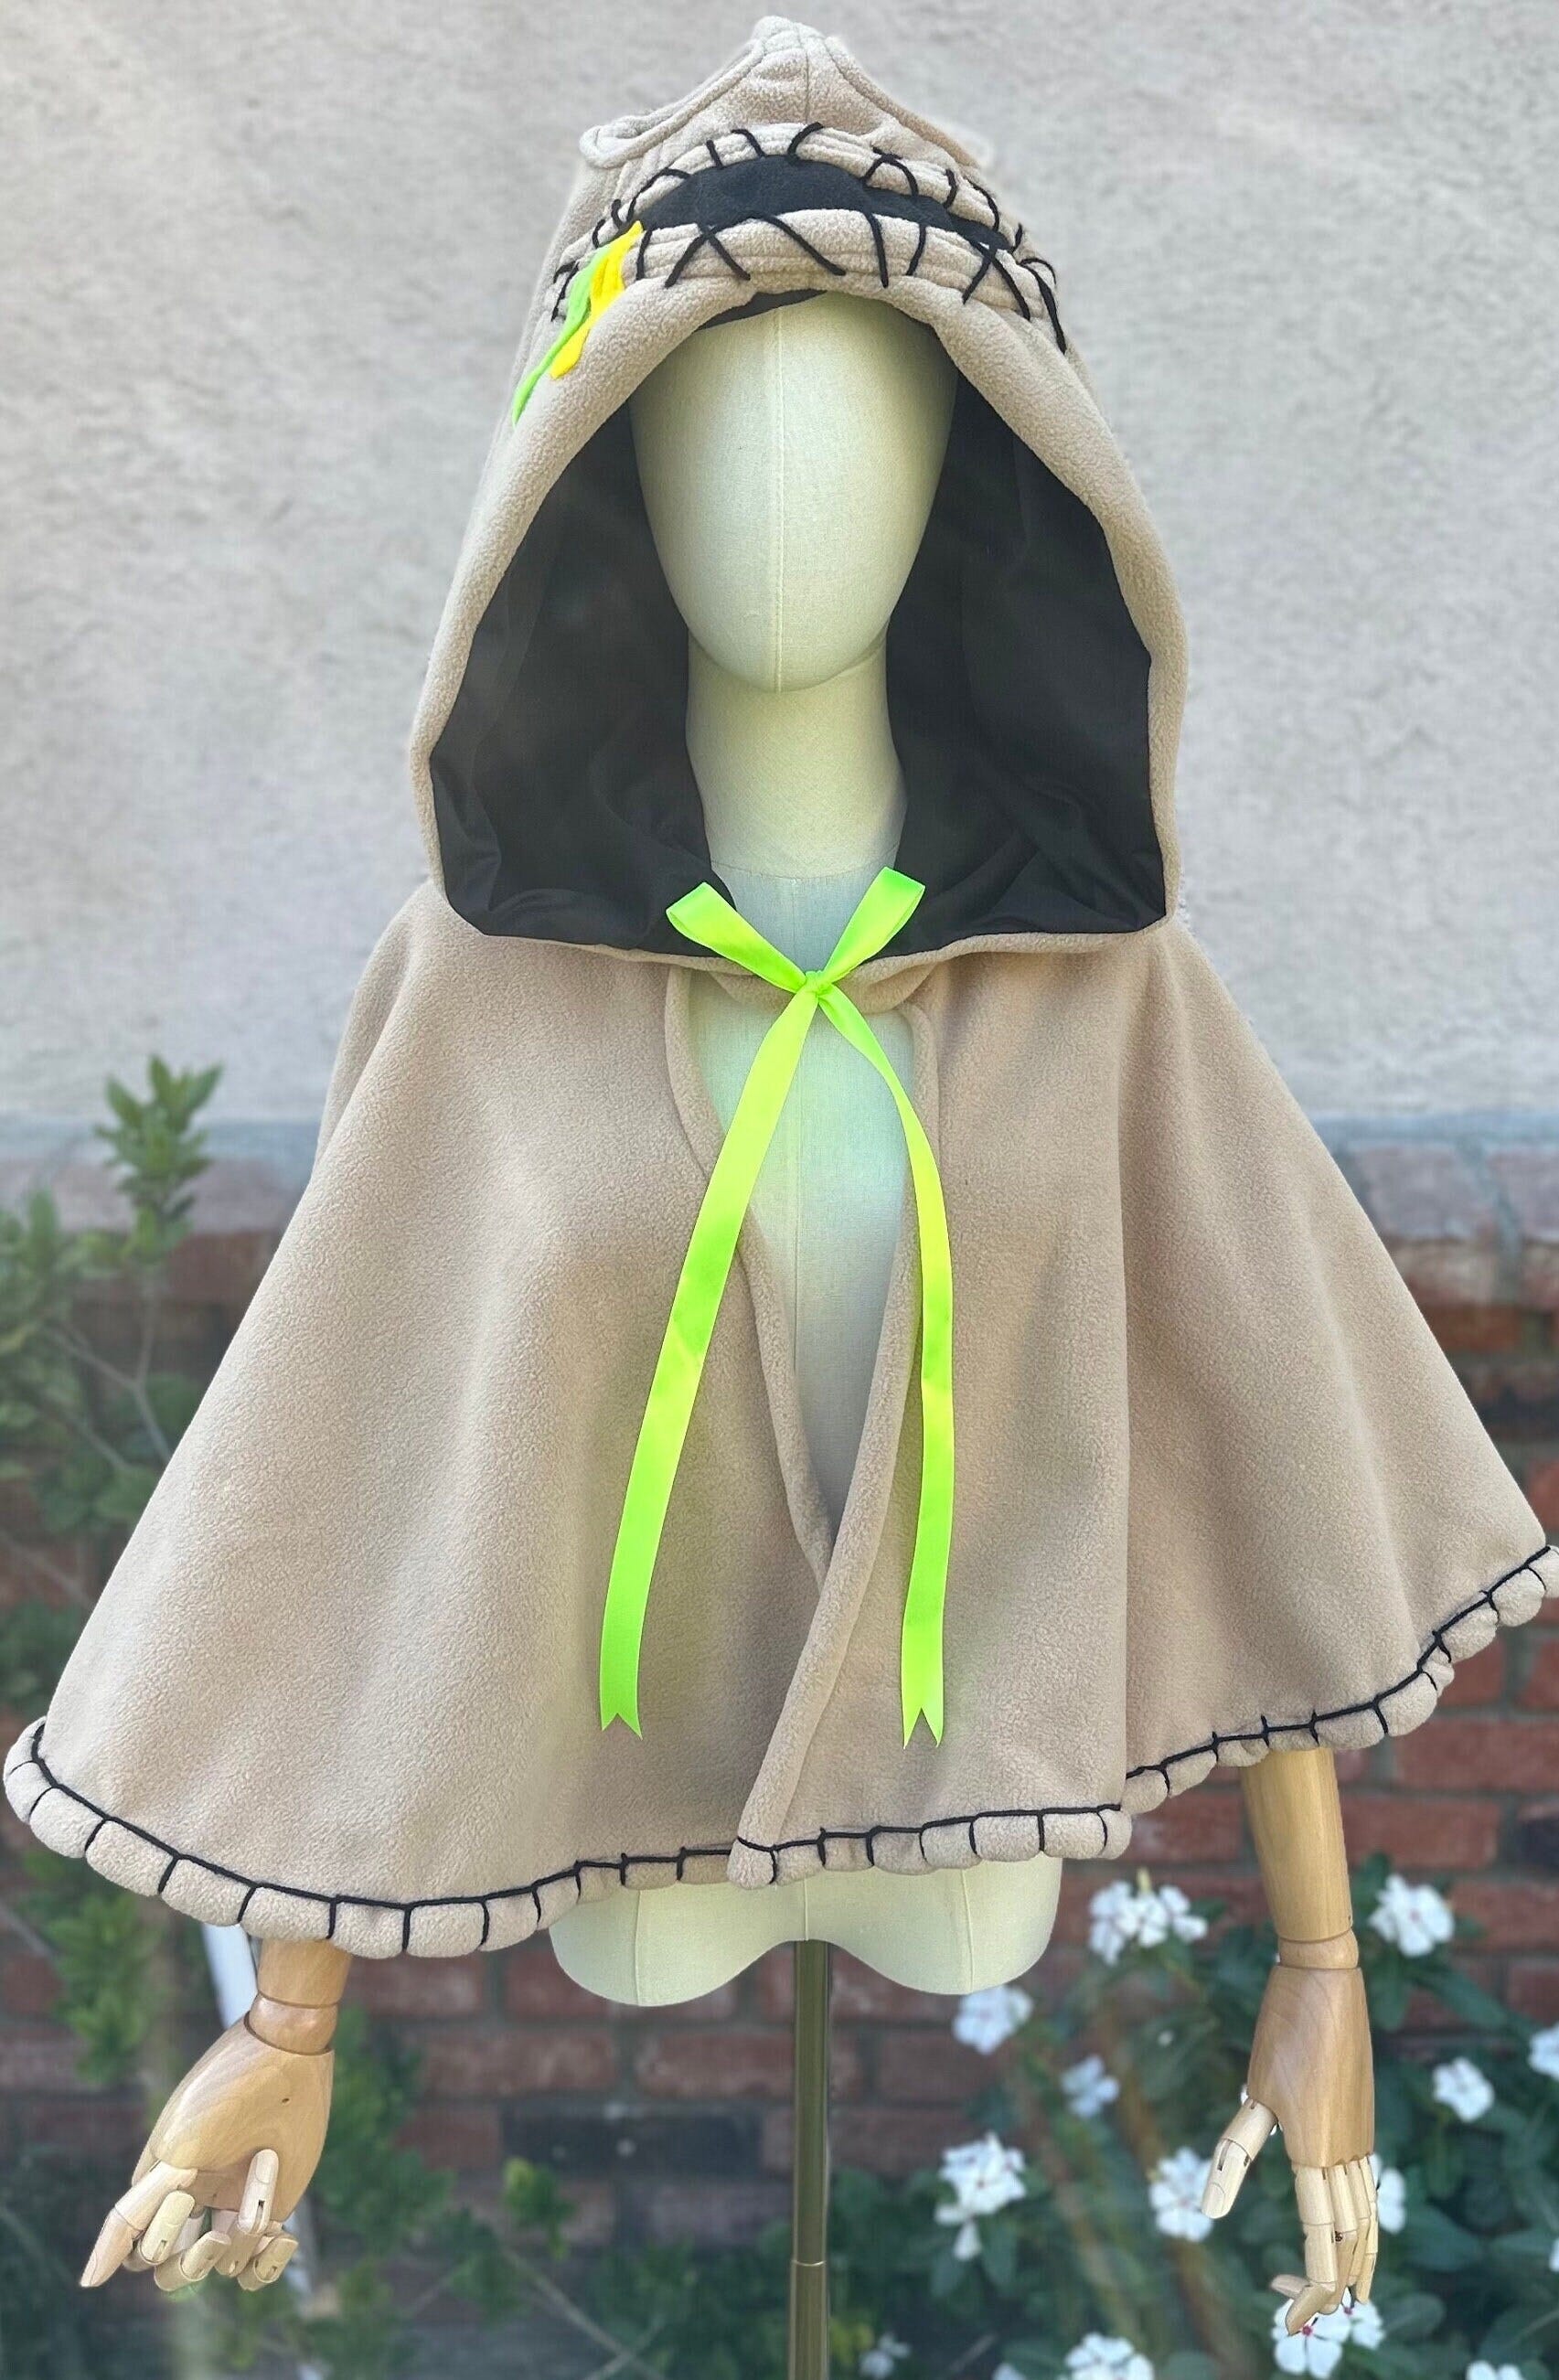 NEW The Nightmare before christmas Oogie Boogie cropped cloak